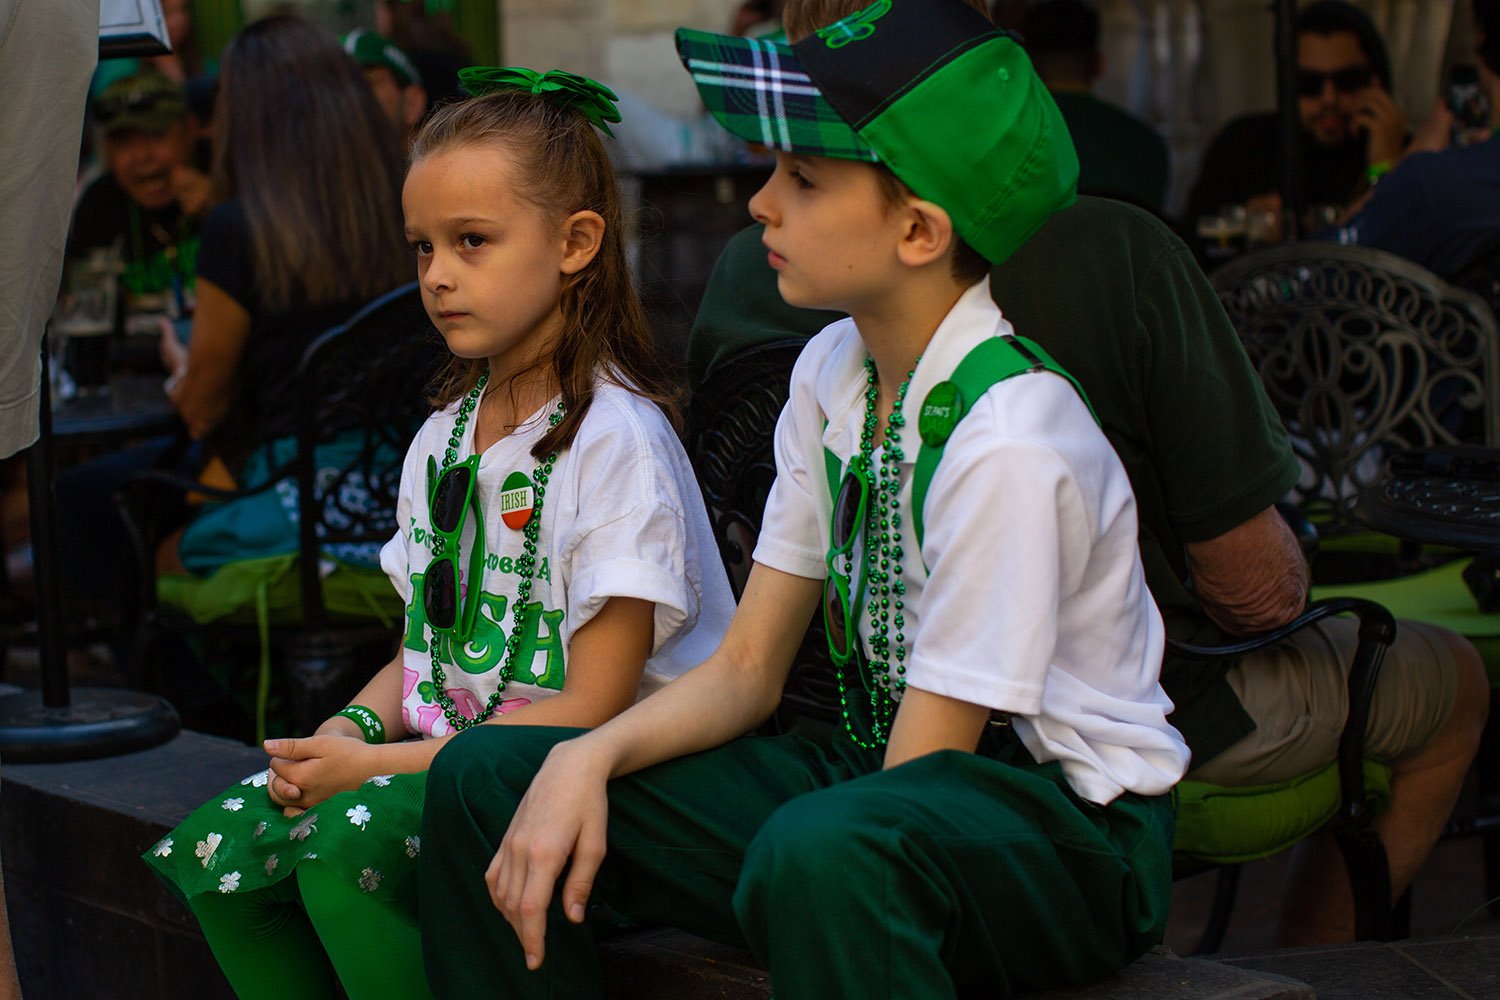 Caitlyn and Maurice sit outside Waxy O’Connor’s Irish Pub in downtown San Antonio, Texas, on Thursday, March 17, 2022. Photo by Kaylee Greenlee Beal | @kgreenleephoto | Heron contributor